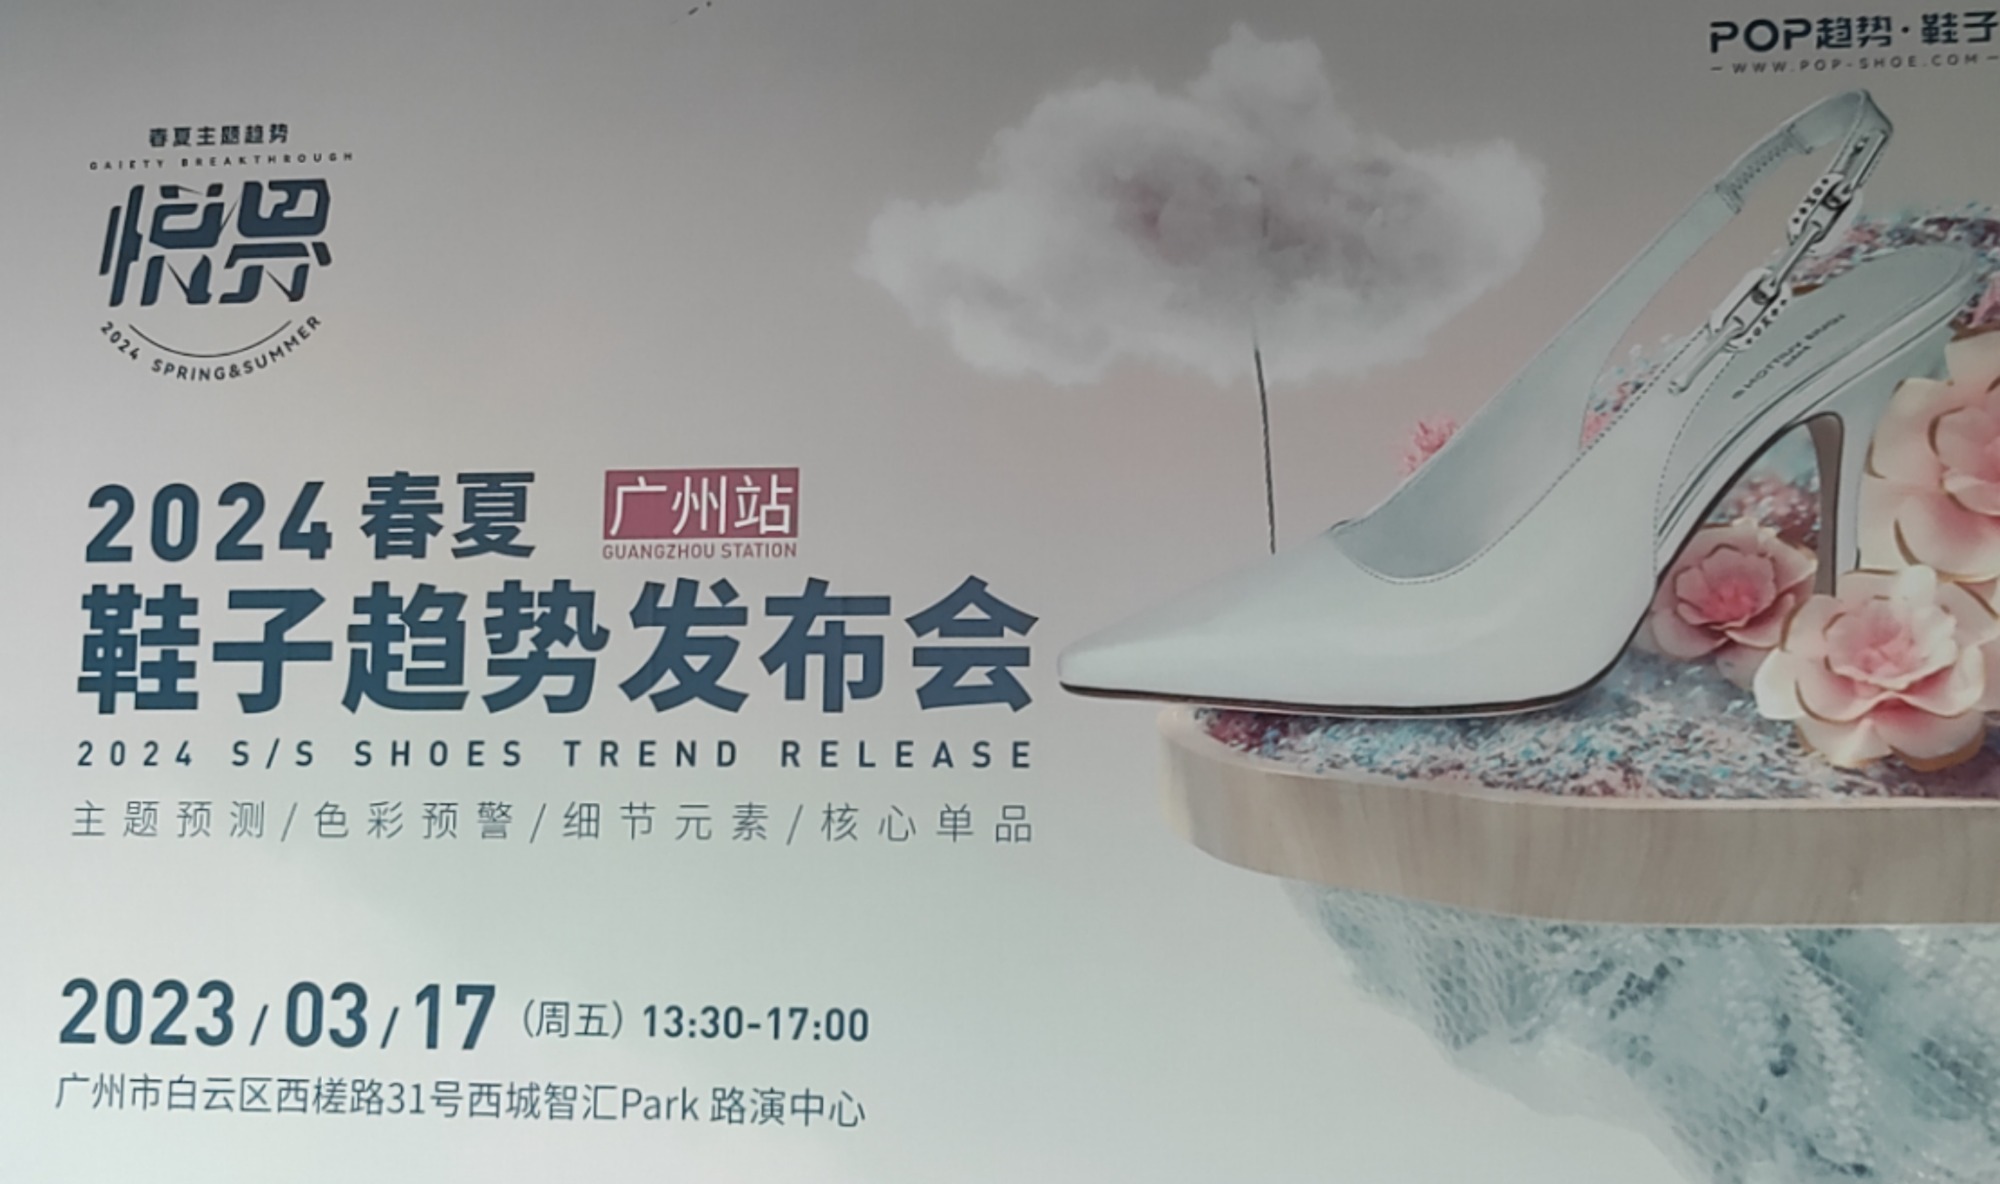 2024 S/S Shoes Trends Release in Guangzhou Station